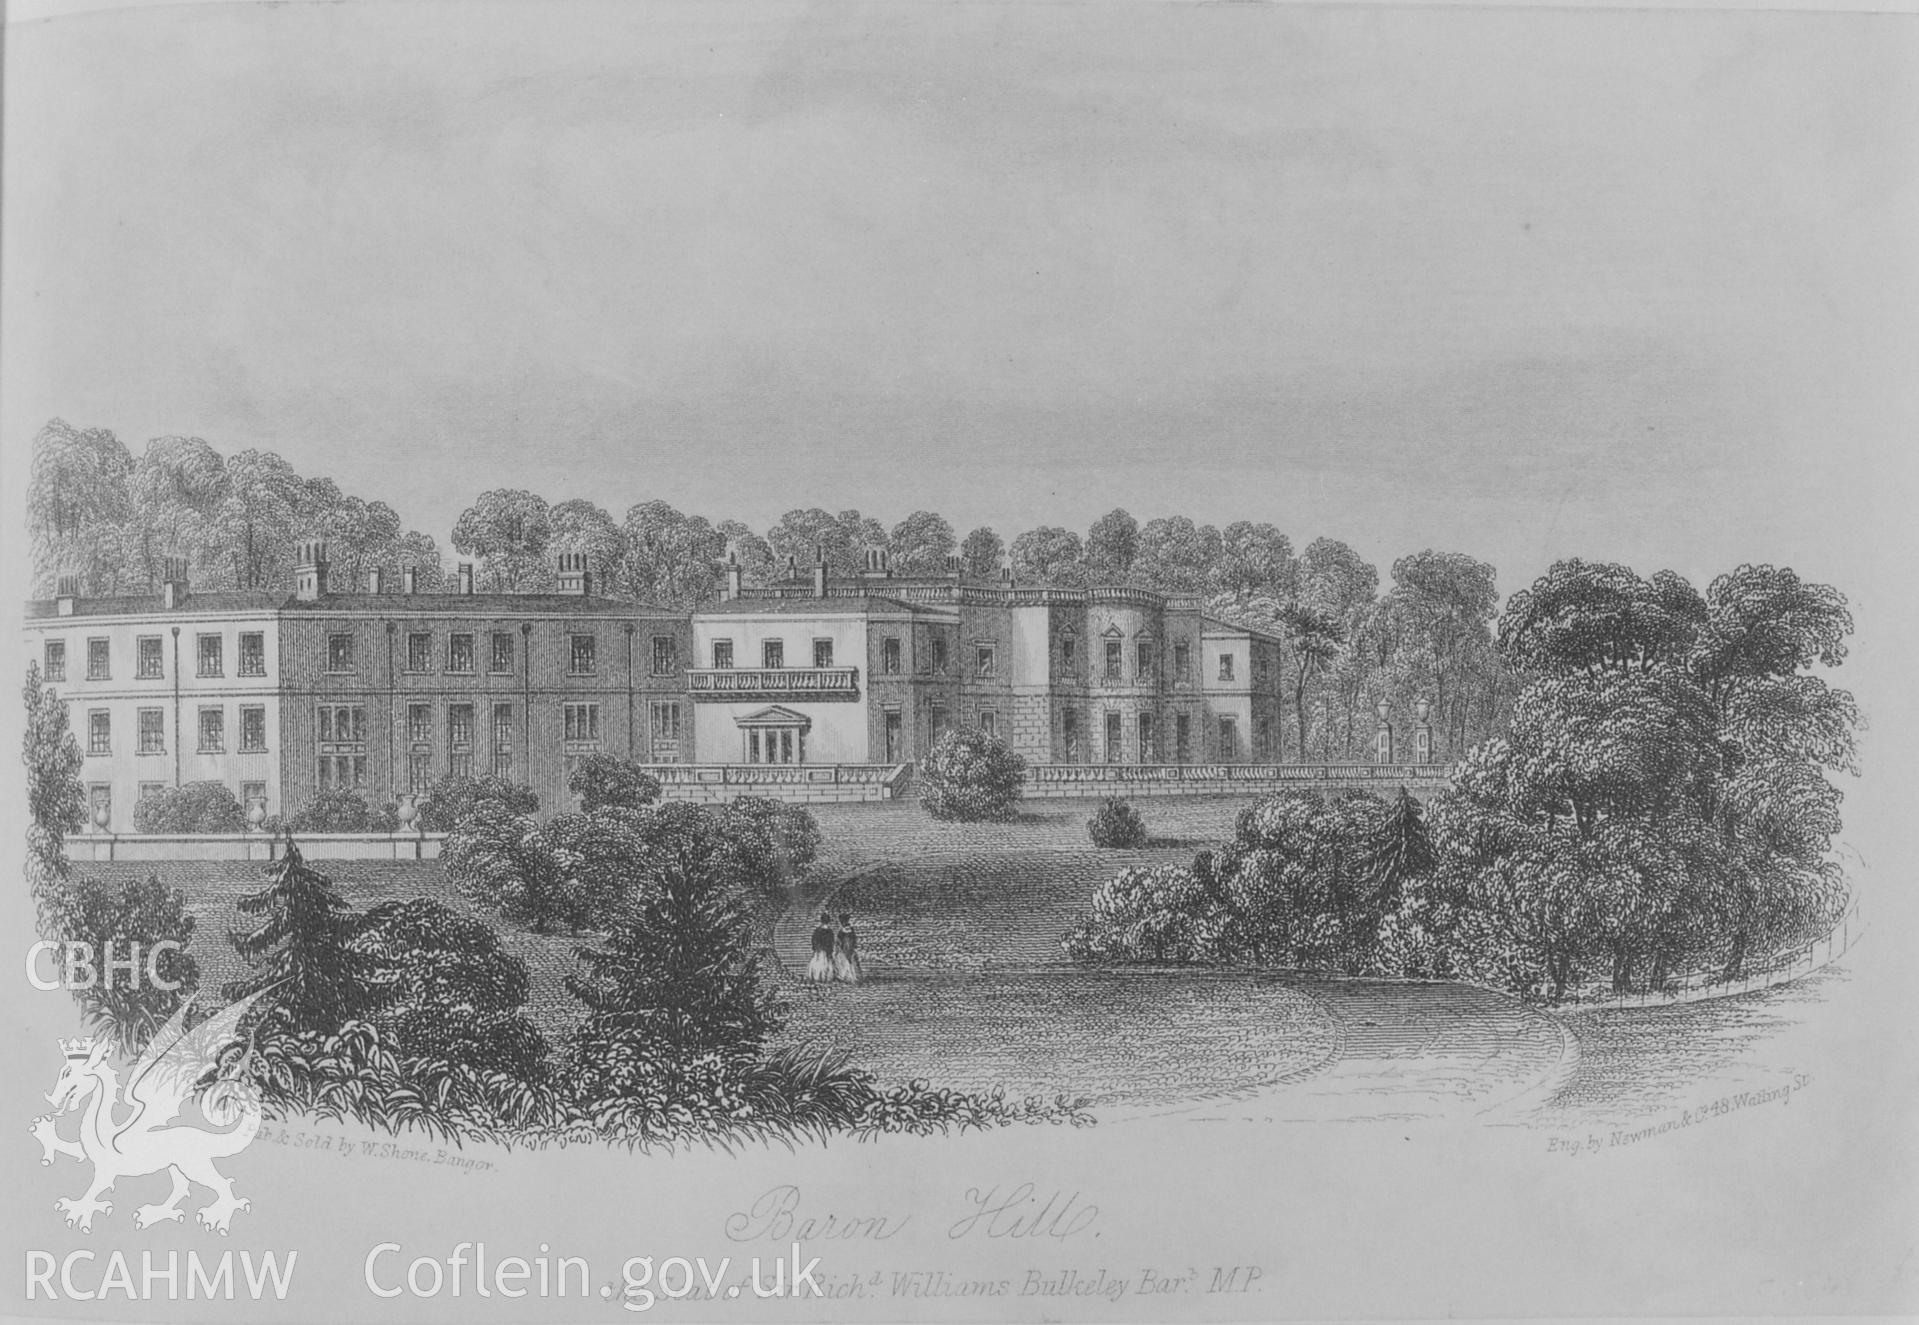 Black and white print showing exterior of Baron Hill, Beaumaris, copied from a postcard loaned by Thomas Lloyd.